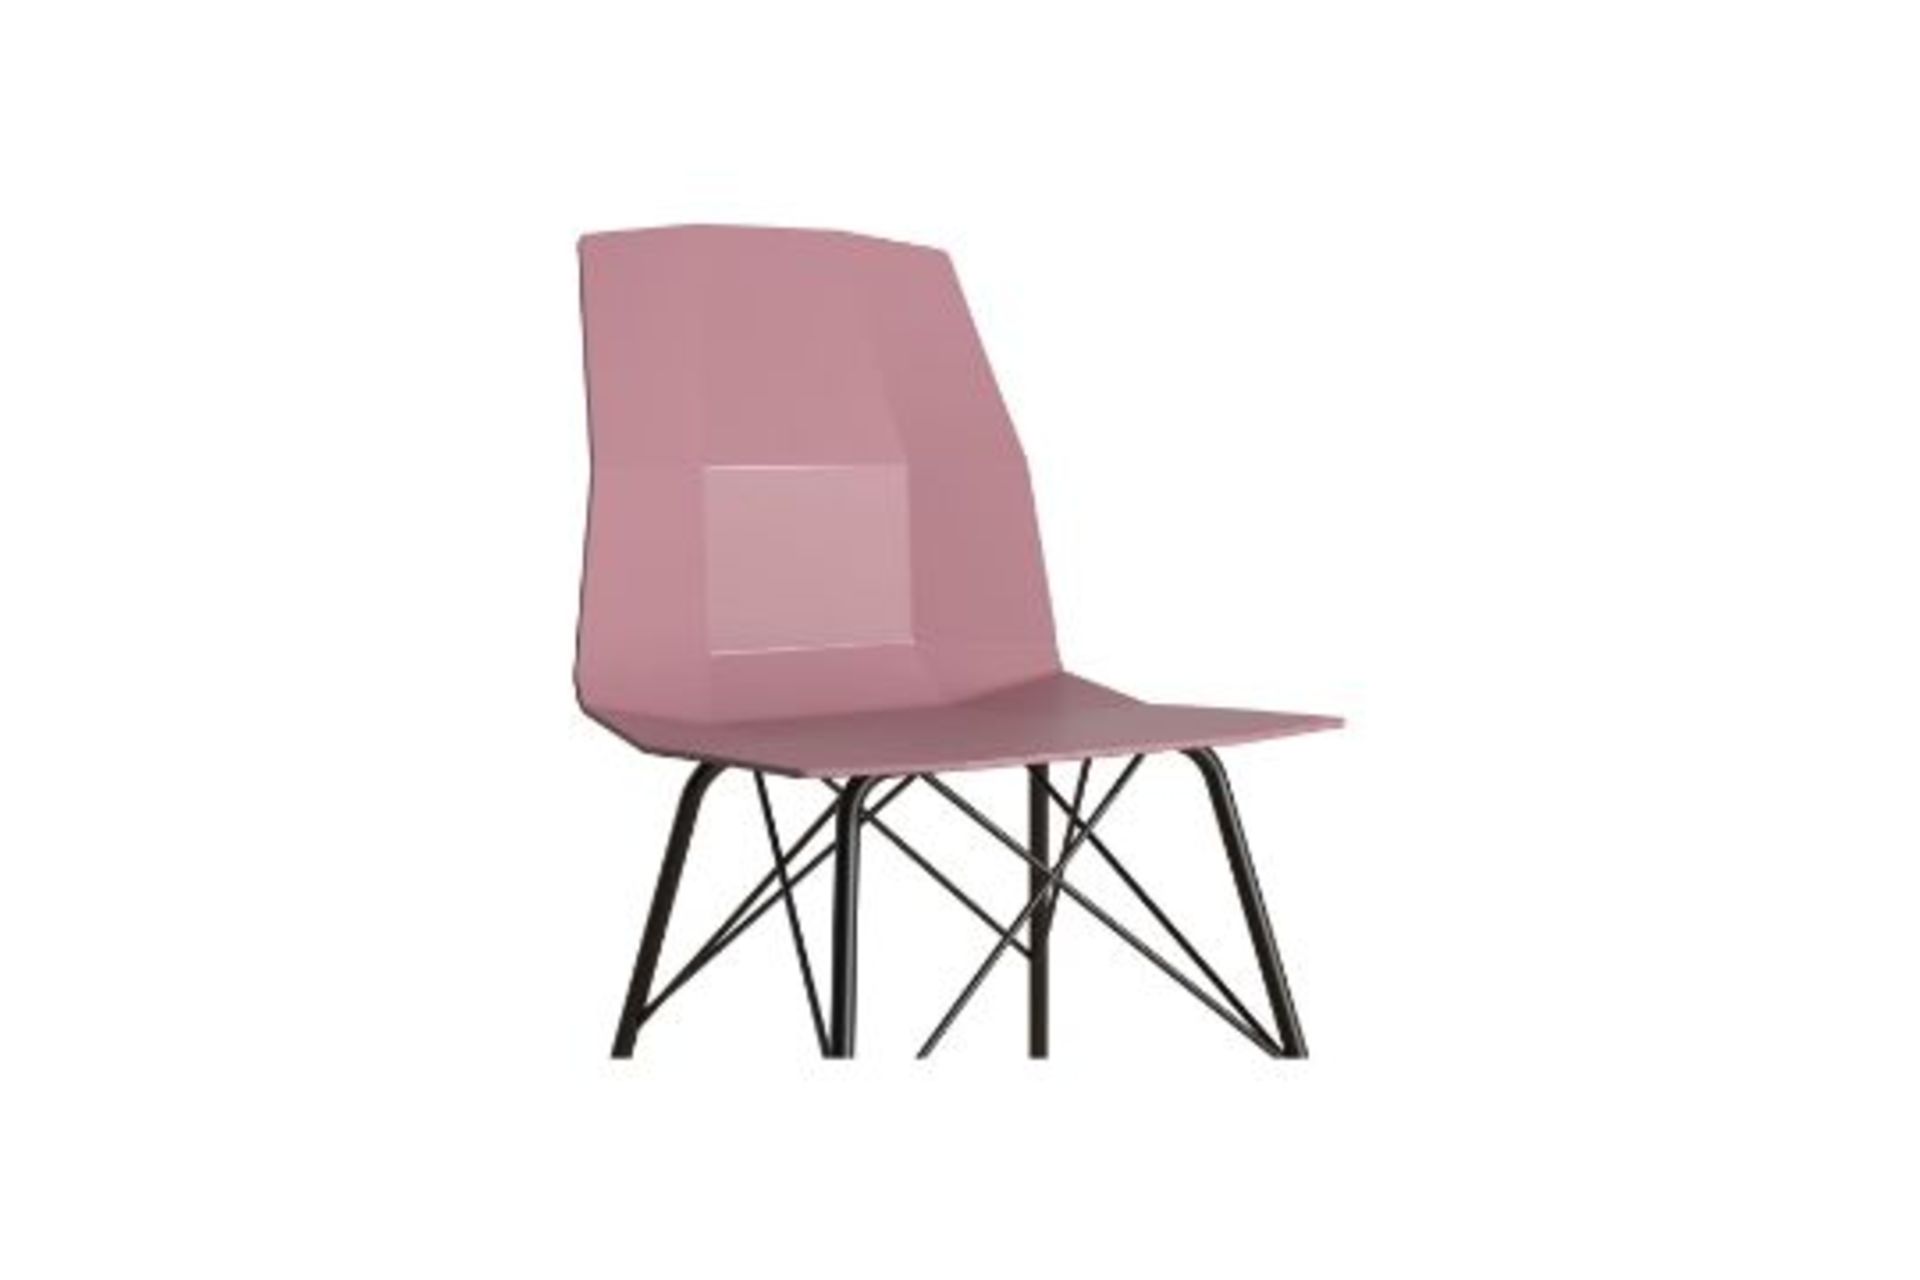 2 X Brand New Deep Plum CosmoLiving Riley Dining Chair, Who needs ordinary when your home décor